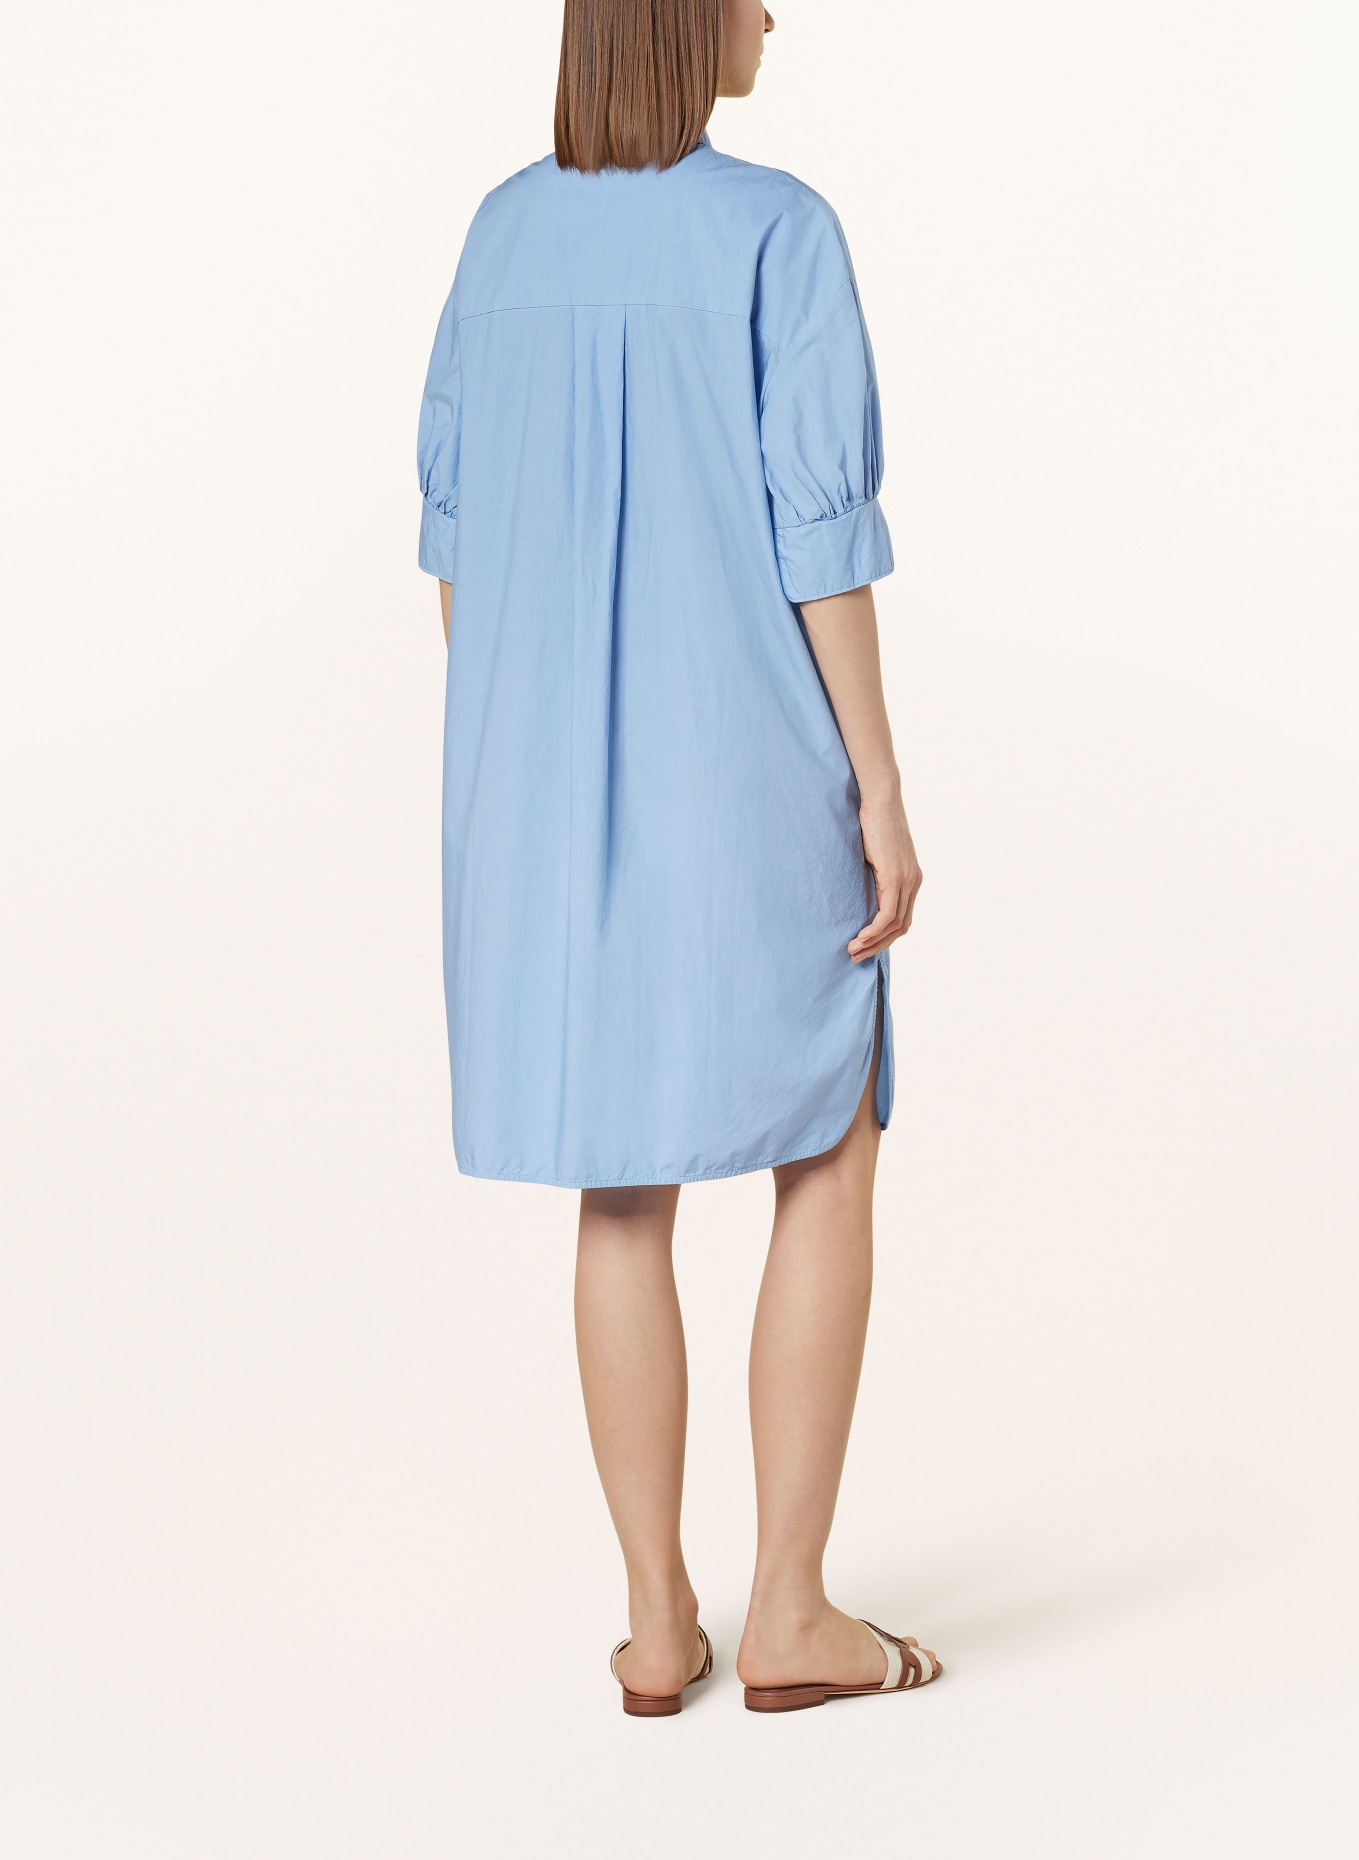 ROSSO35 Dress with 3/4 sleeves, Color: LIGHT BLUE (Image 3)